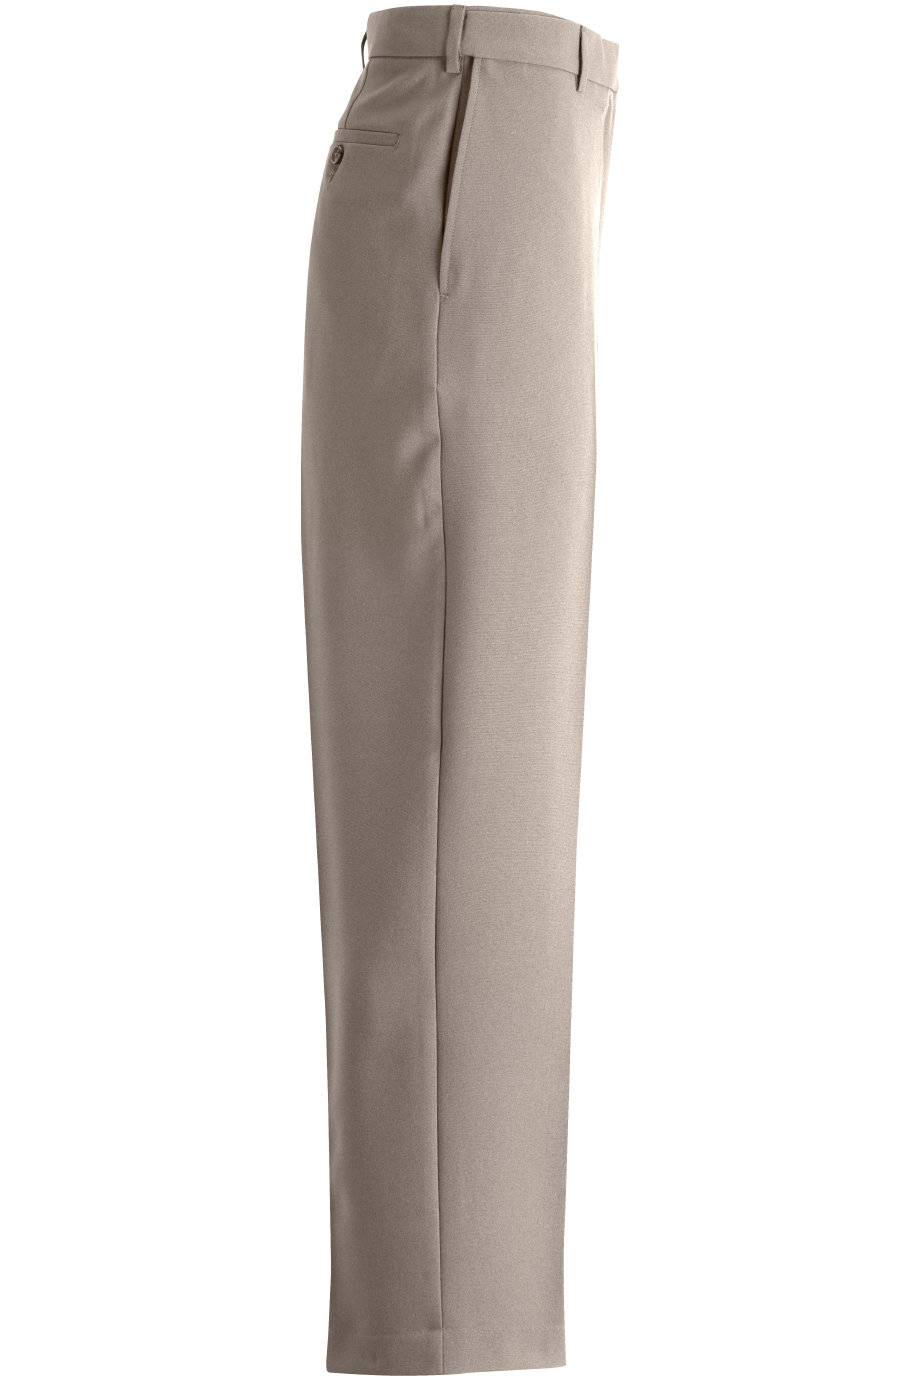 edwards ESSENTIAL FLAT FRONT PANT